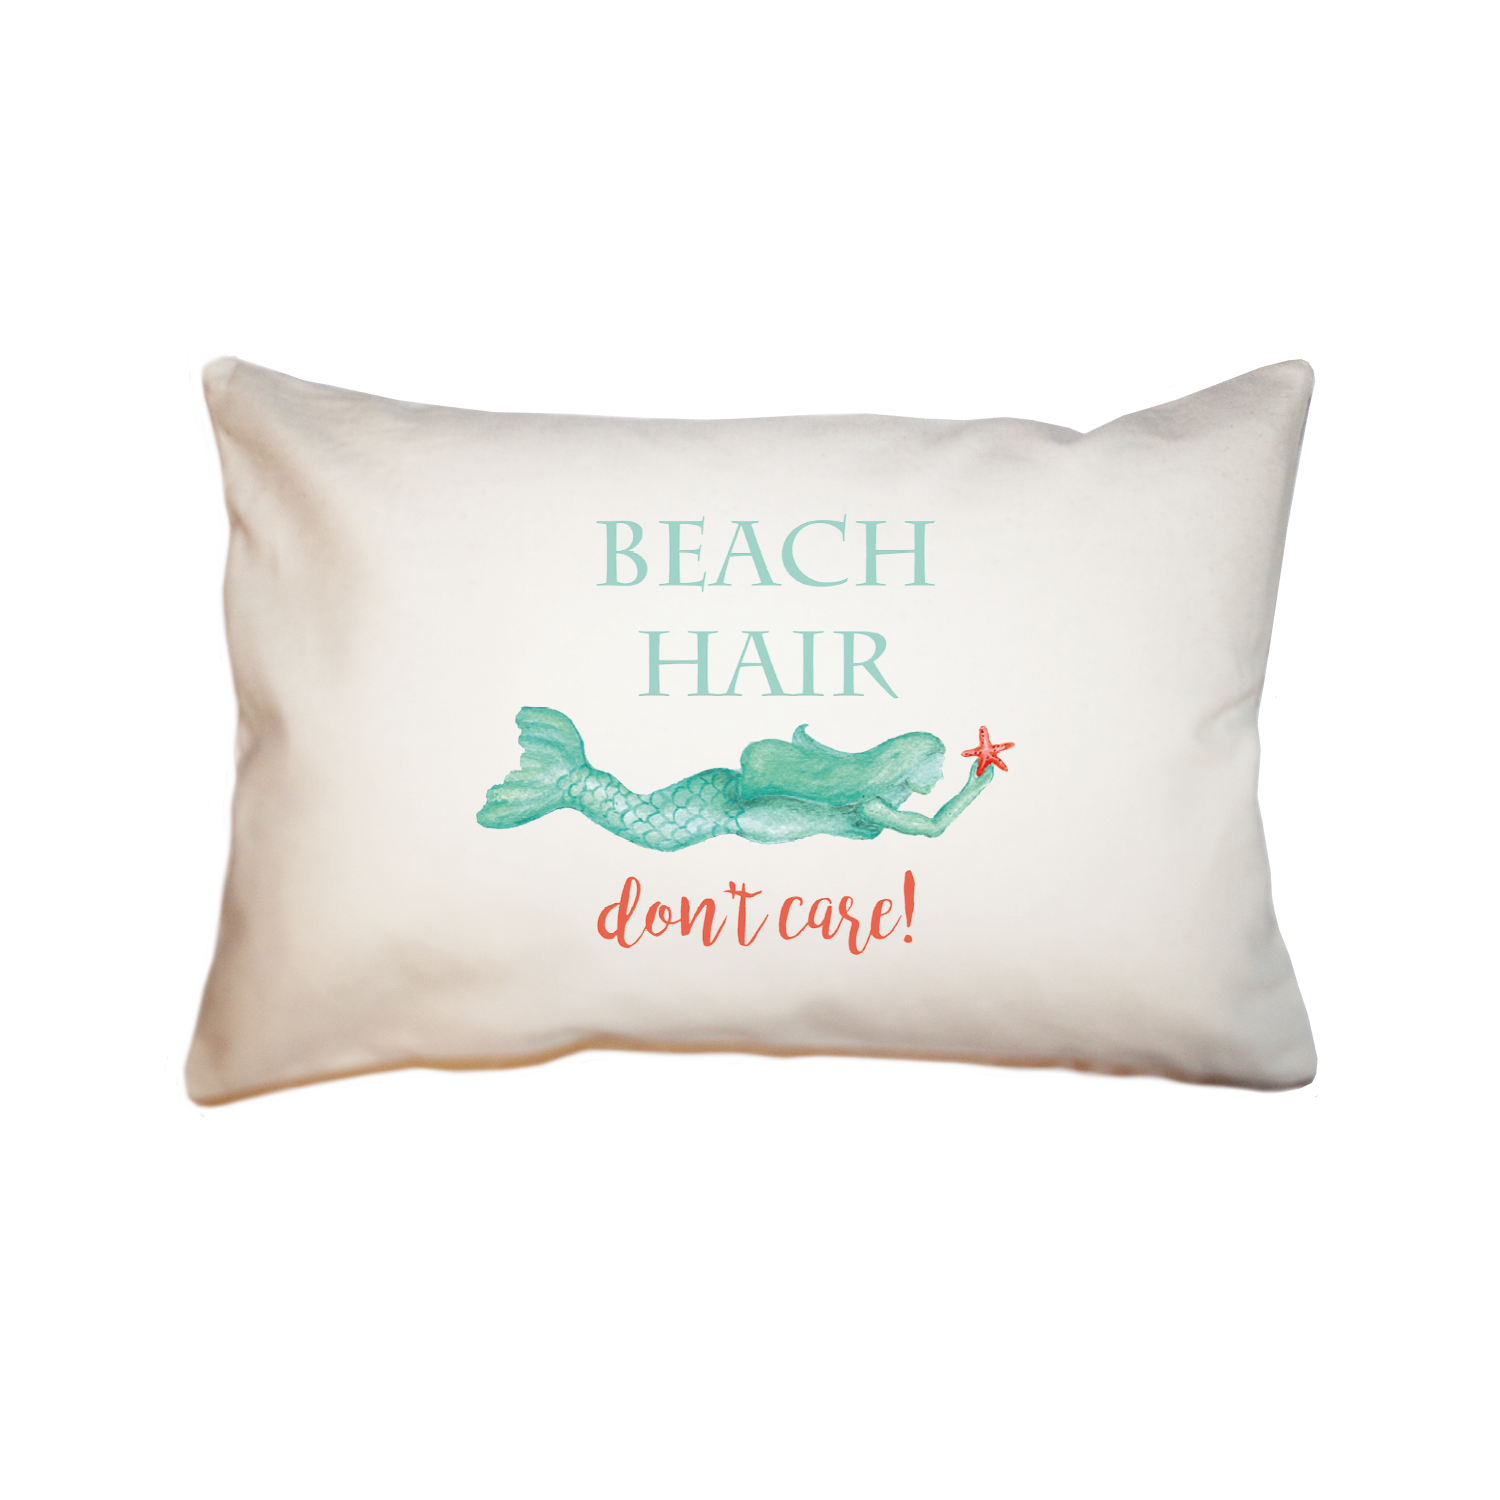 beach hair don't care large rectangle pillow